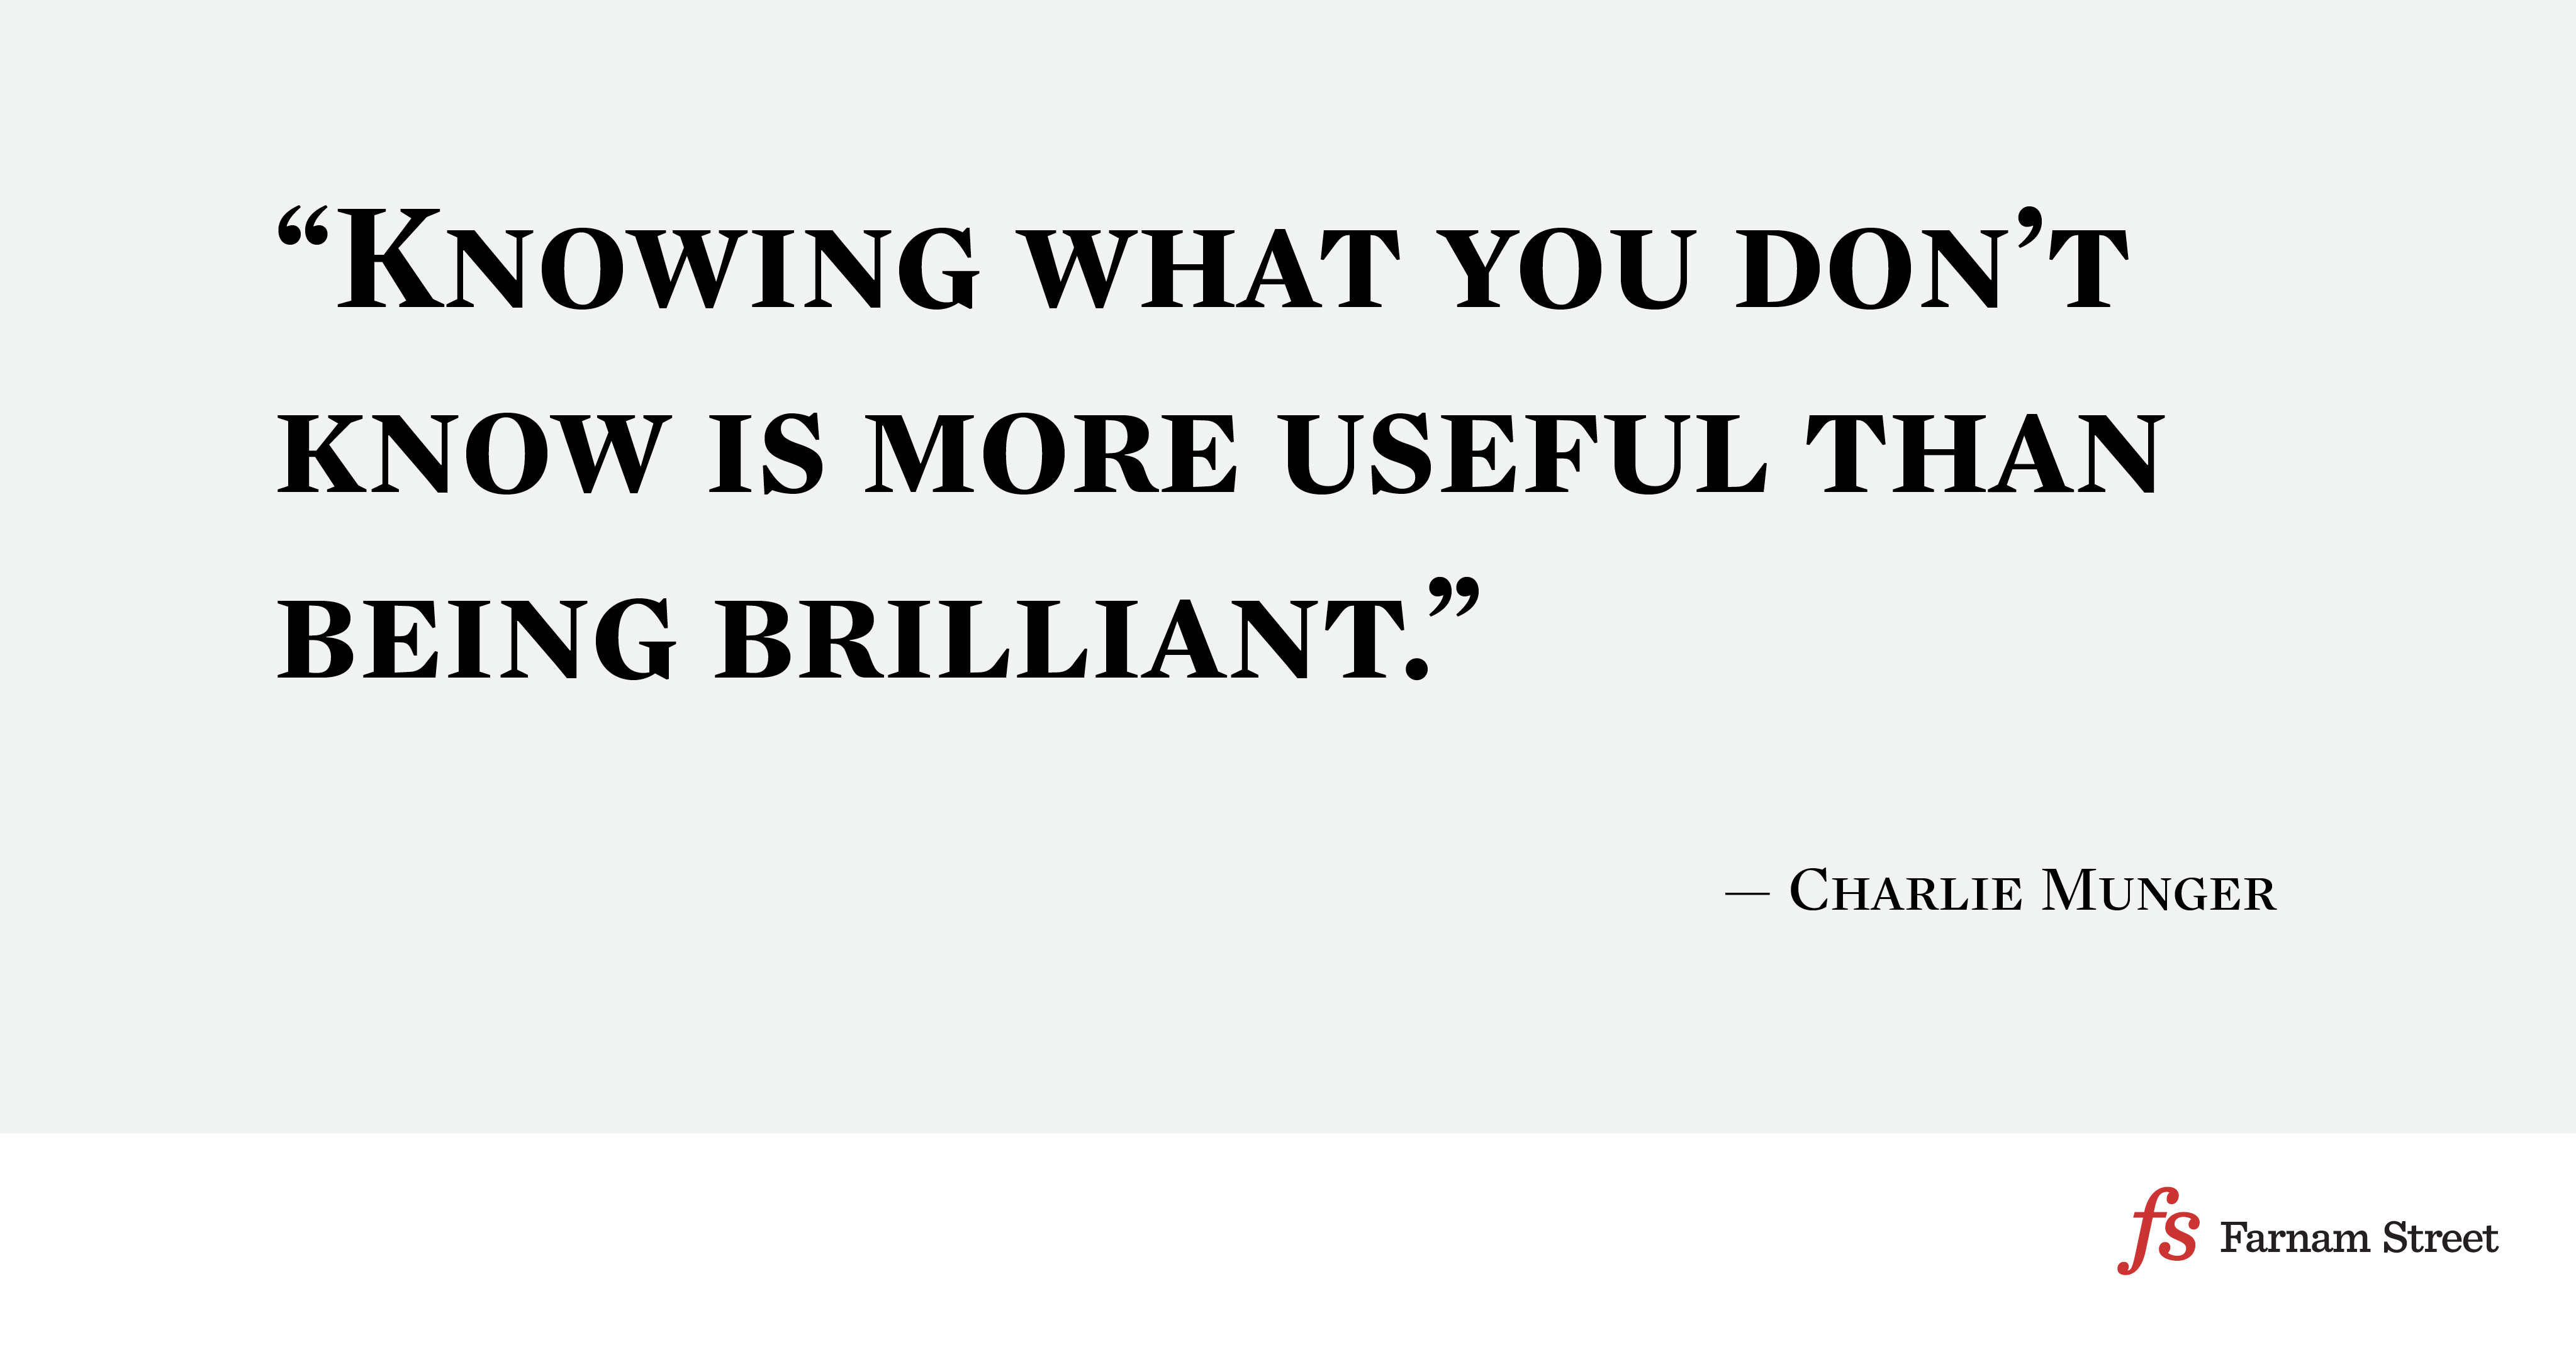 Charlie Munger on Getting Rich, Wisdom, Focus, Fake Knowledge and More